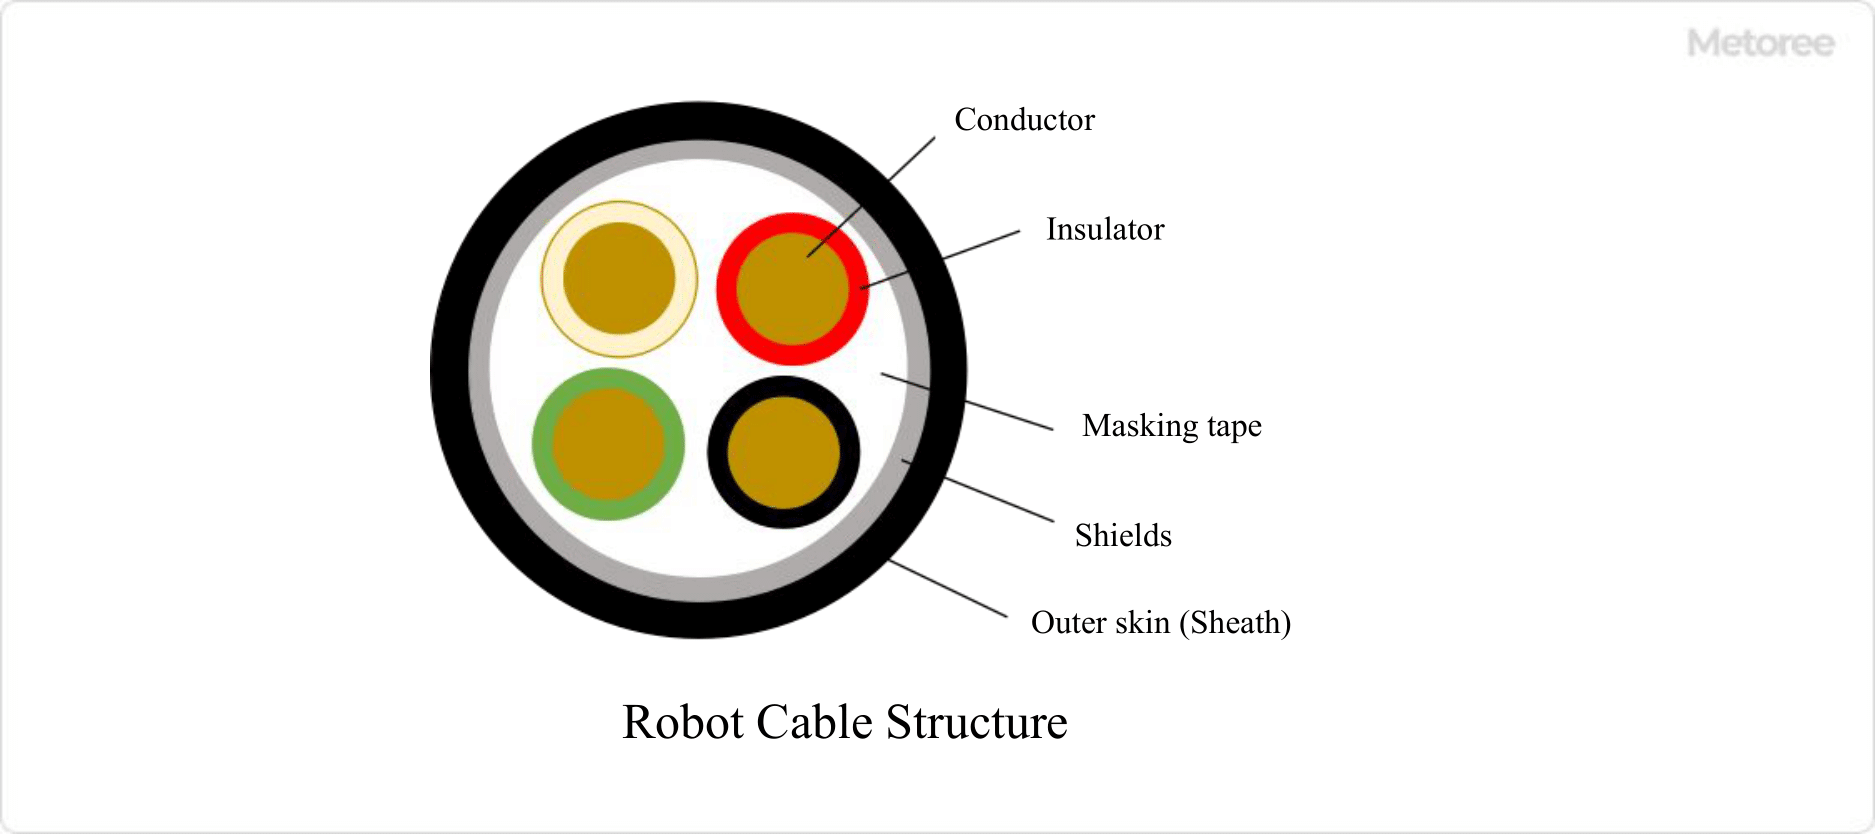 Figure 2. Structure of robot cable